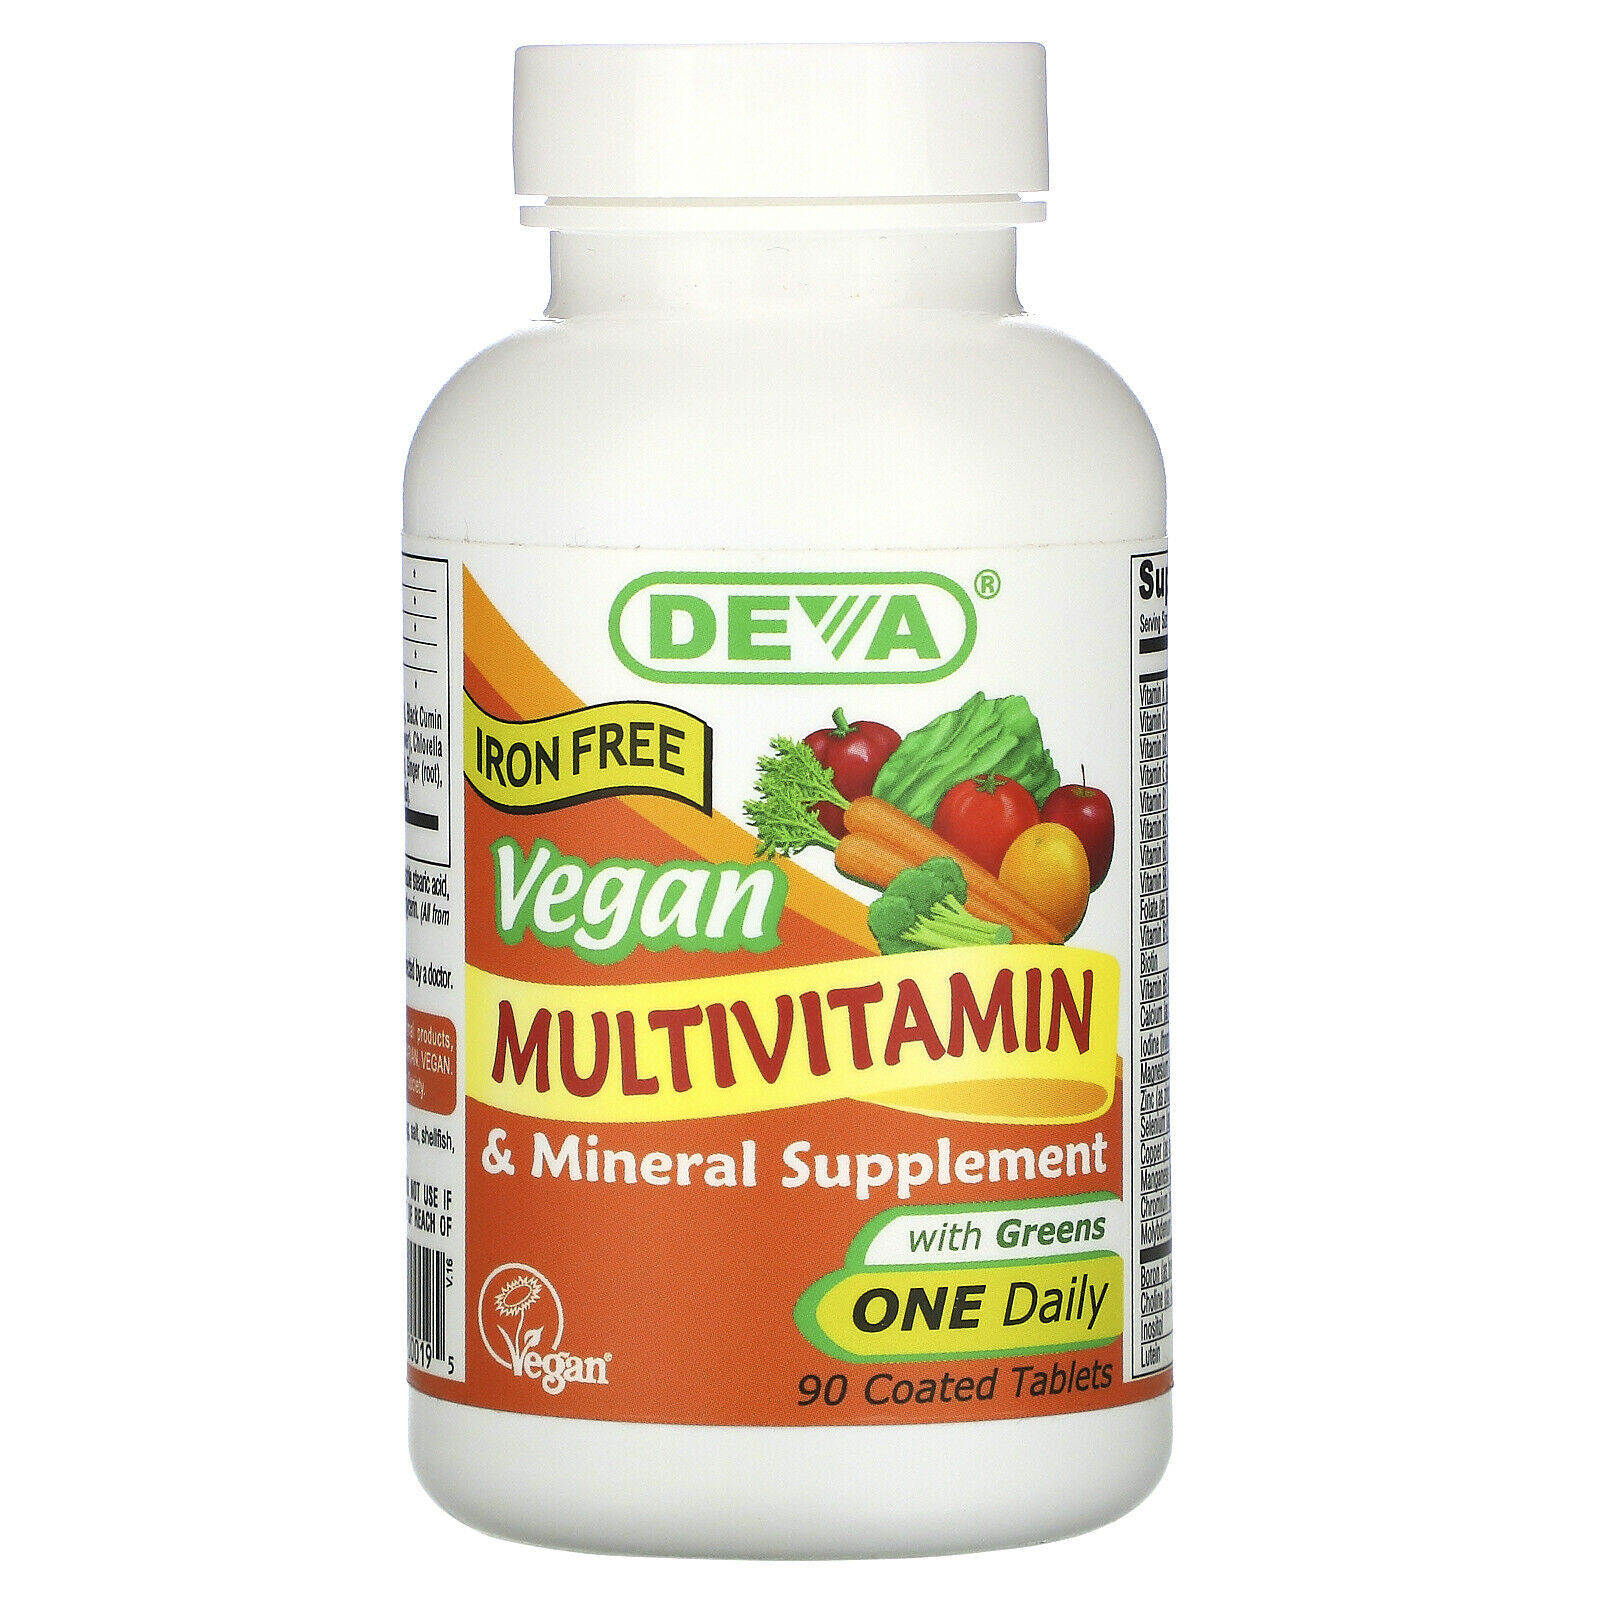 Vegan, Multivitamin & Mineral Supplement, Iron Free, 90 Coated Tablets